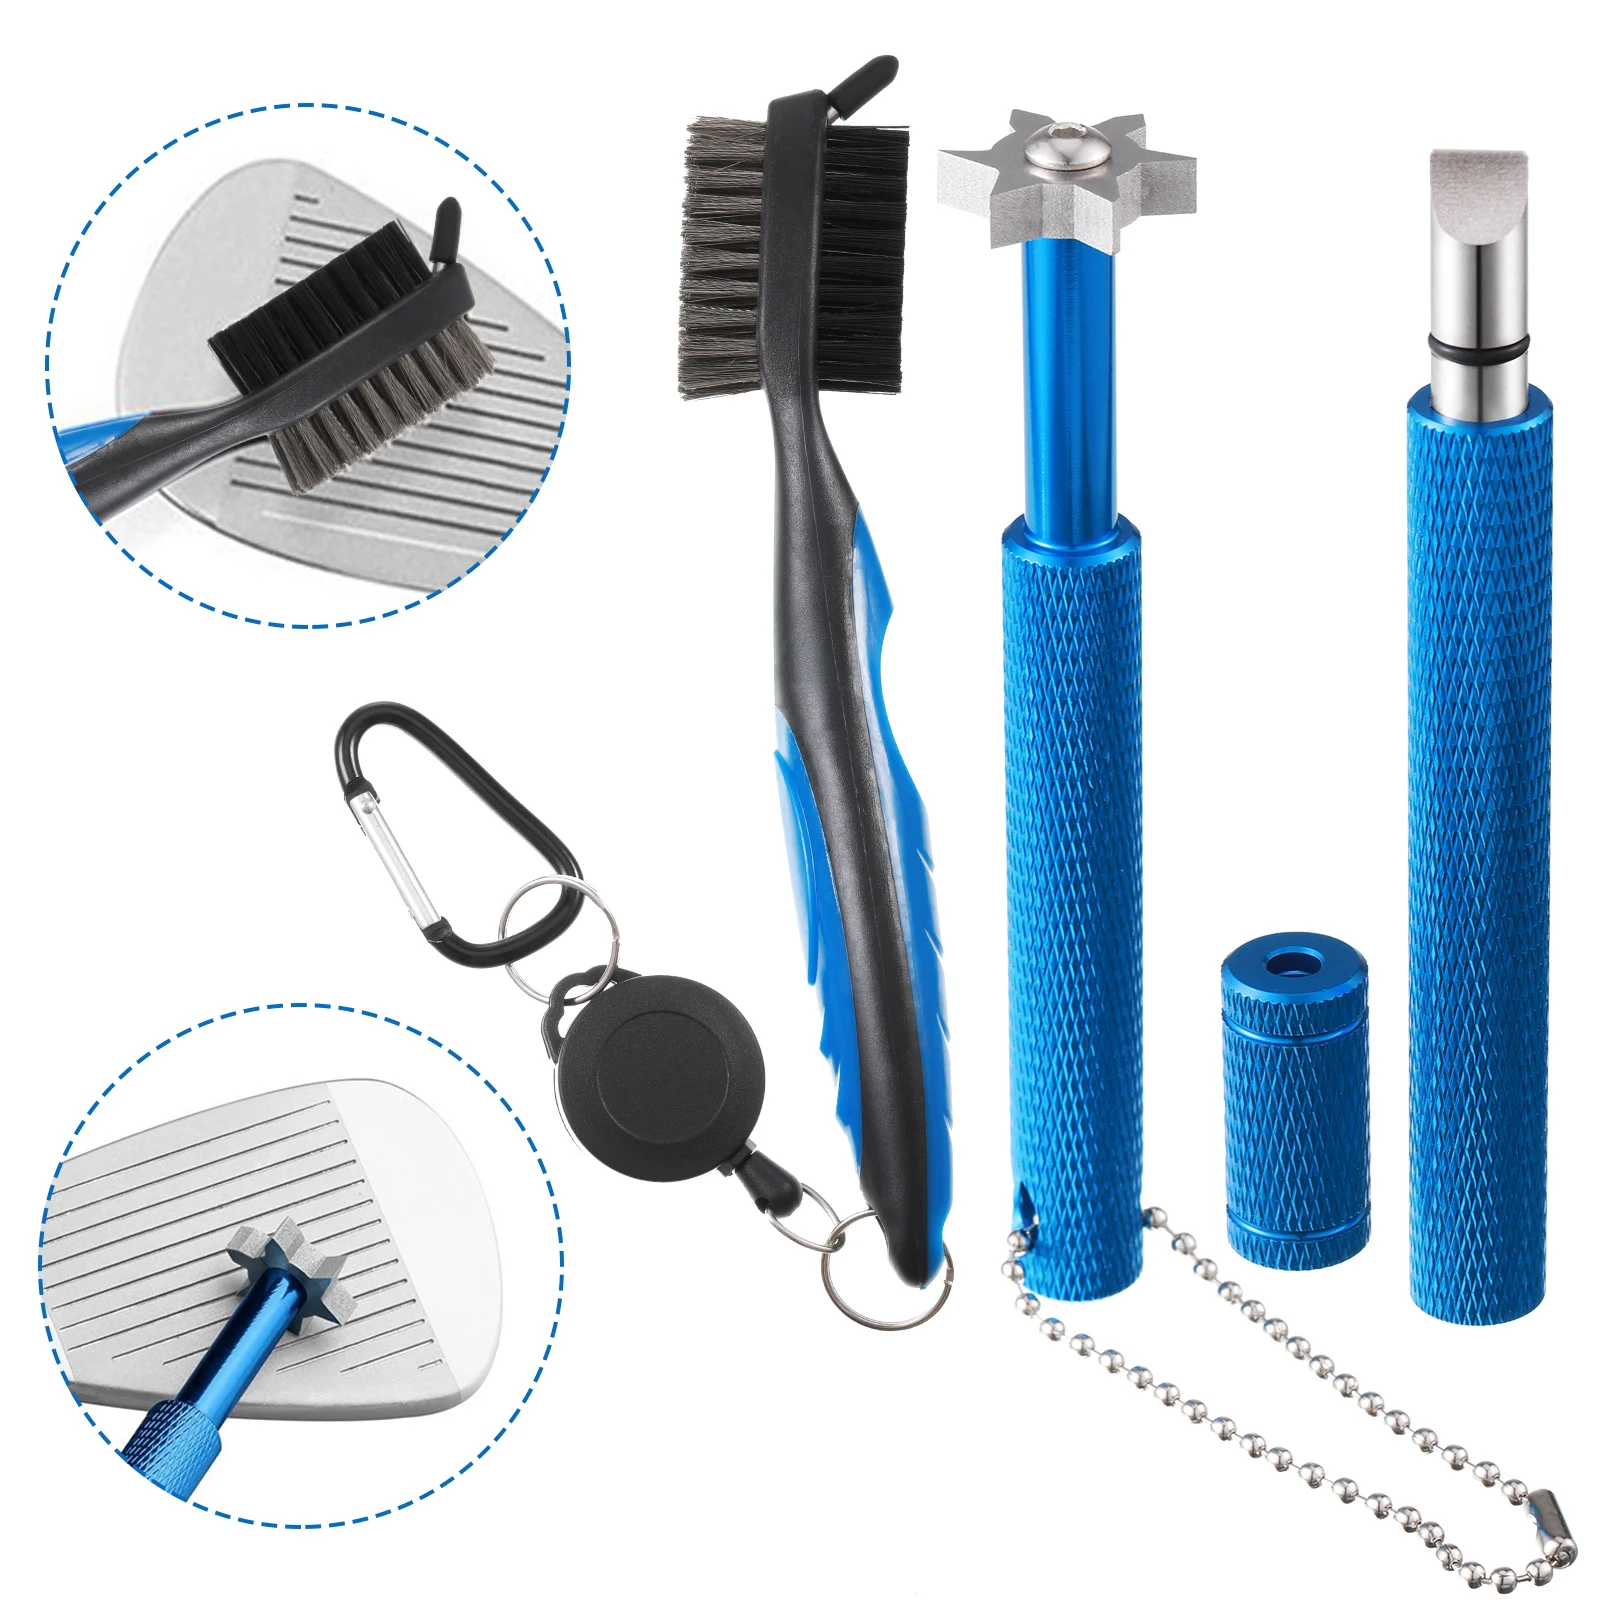 

Waterproof Double Sided Golf Clean Brush Anti-skidding Golf Groove Sharpener Stable Durable Cleaning Tool Brushes for Ball Club